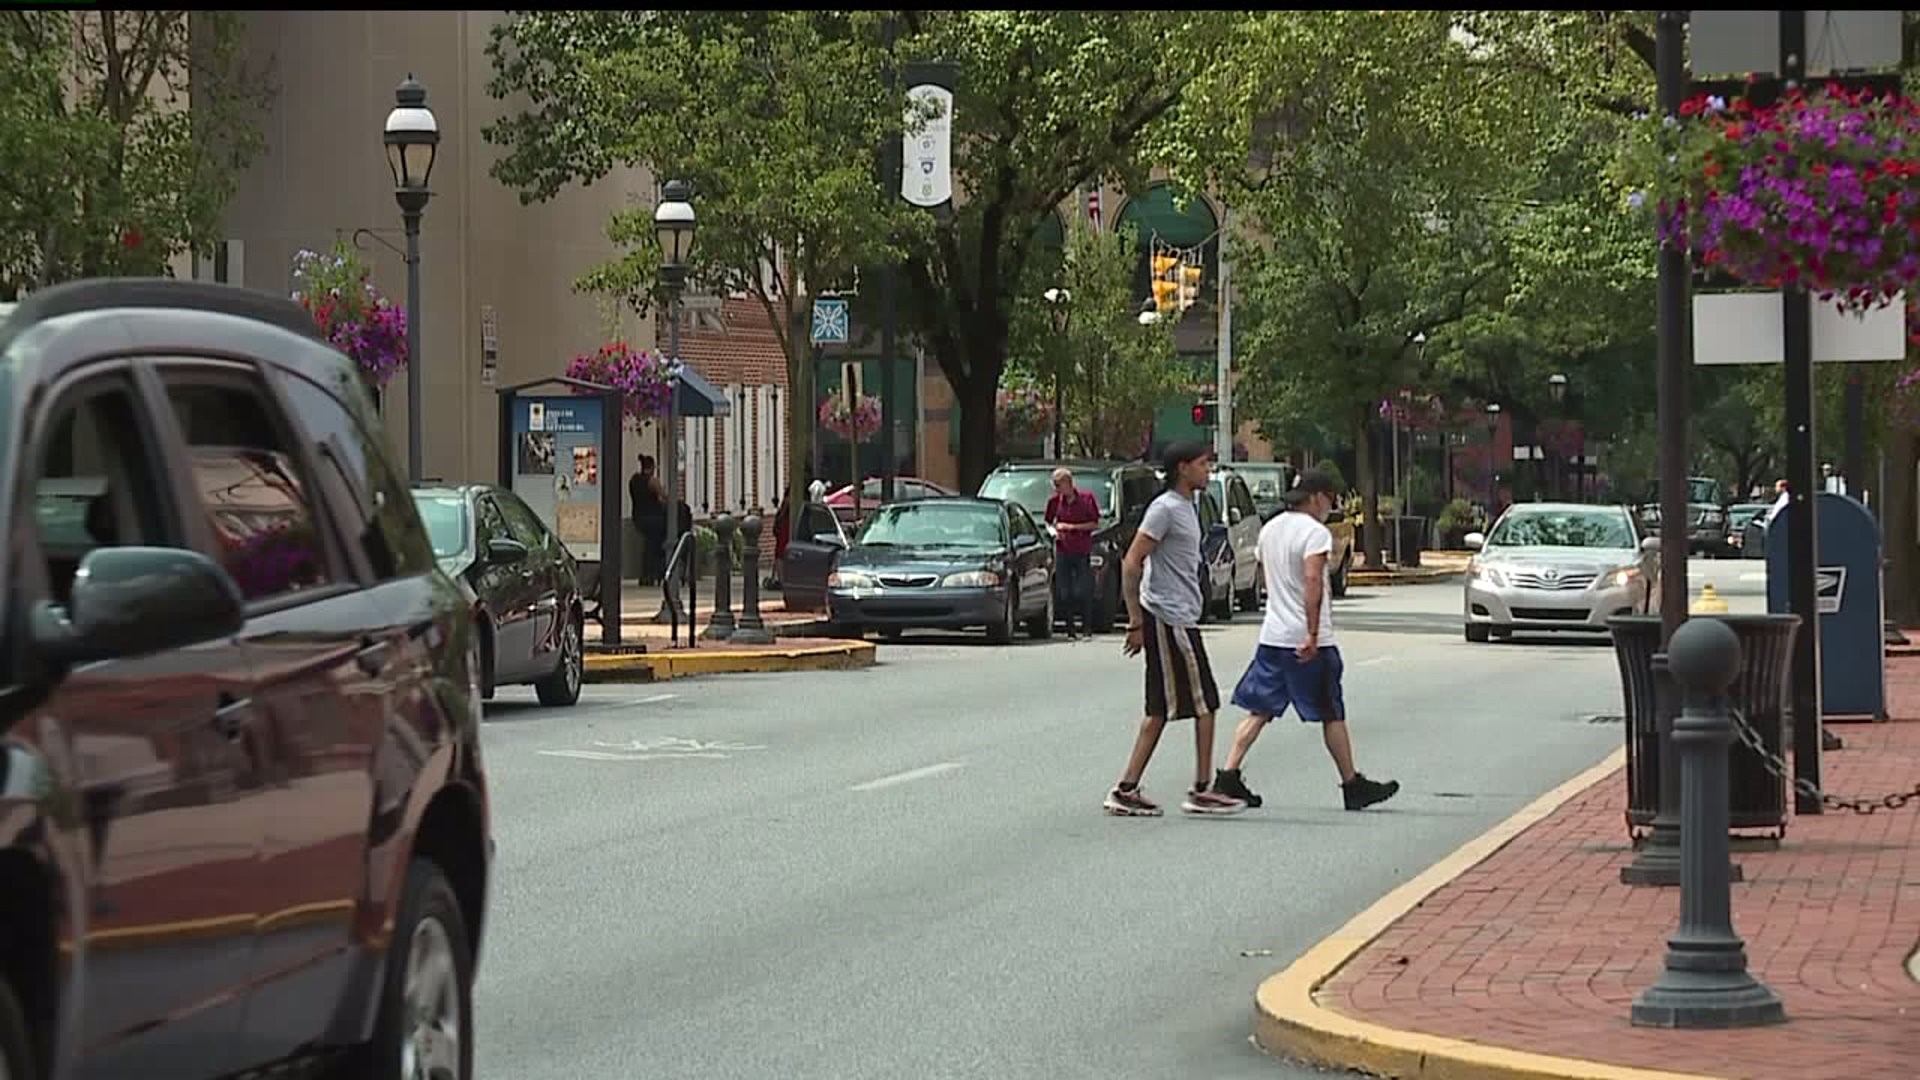 York City officials push for pedestrian safety on the streets